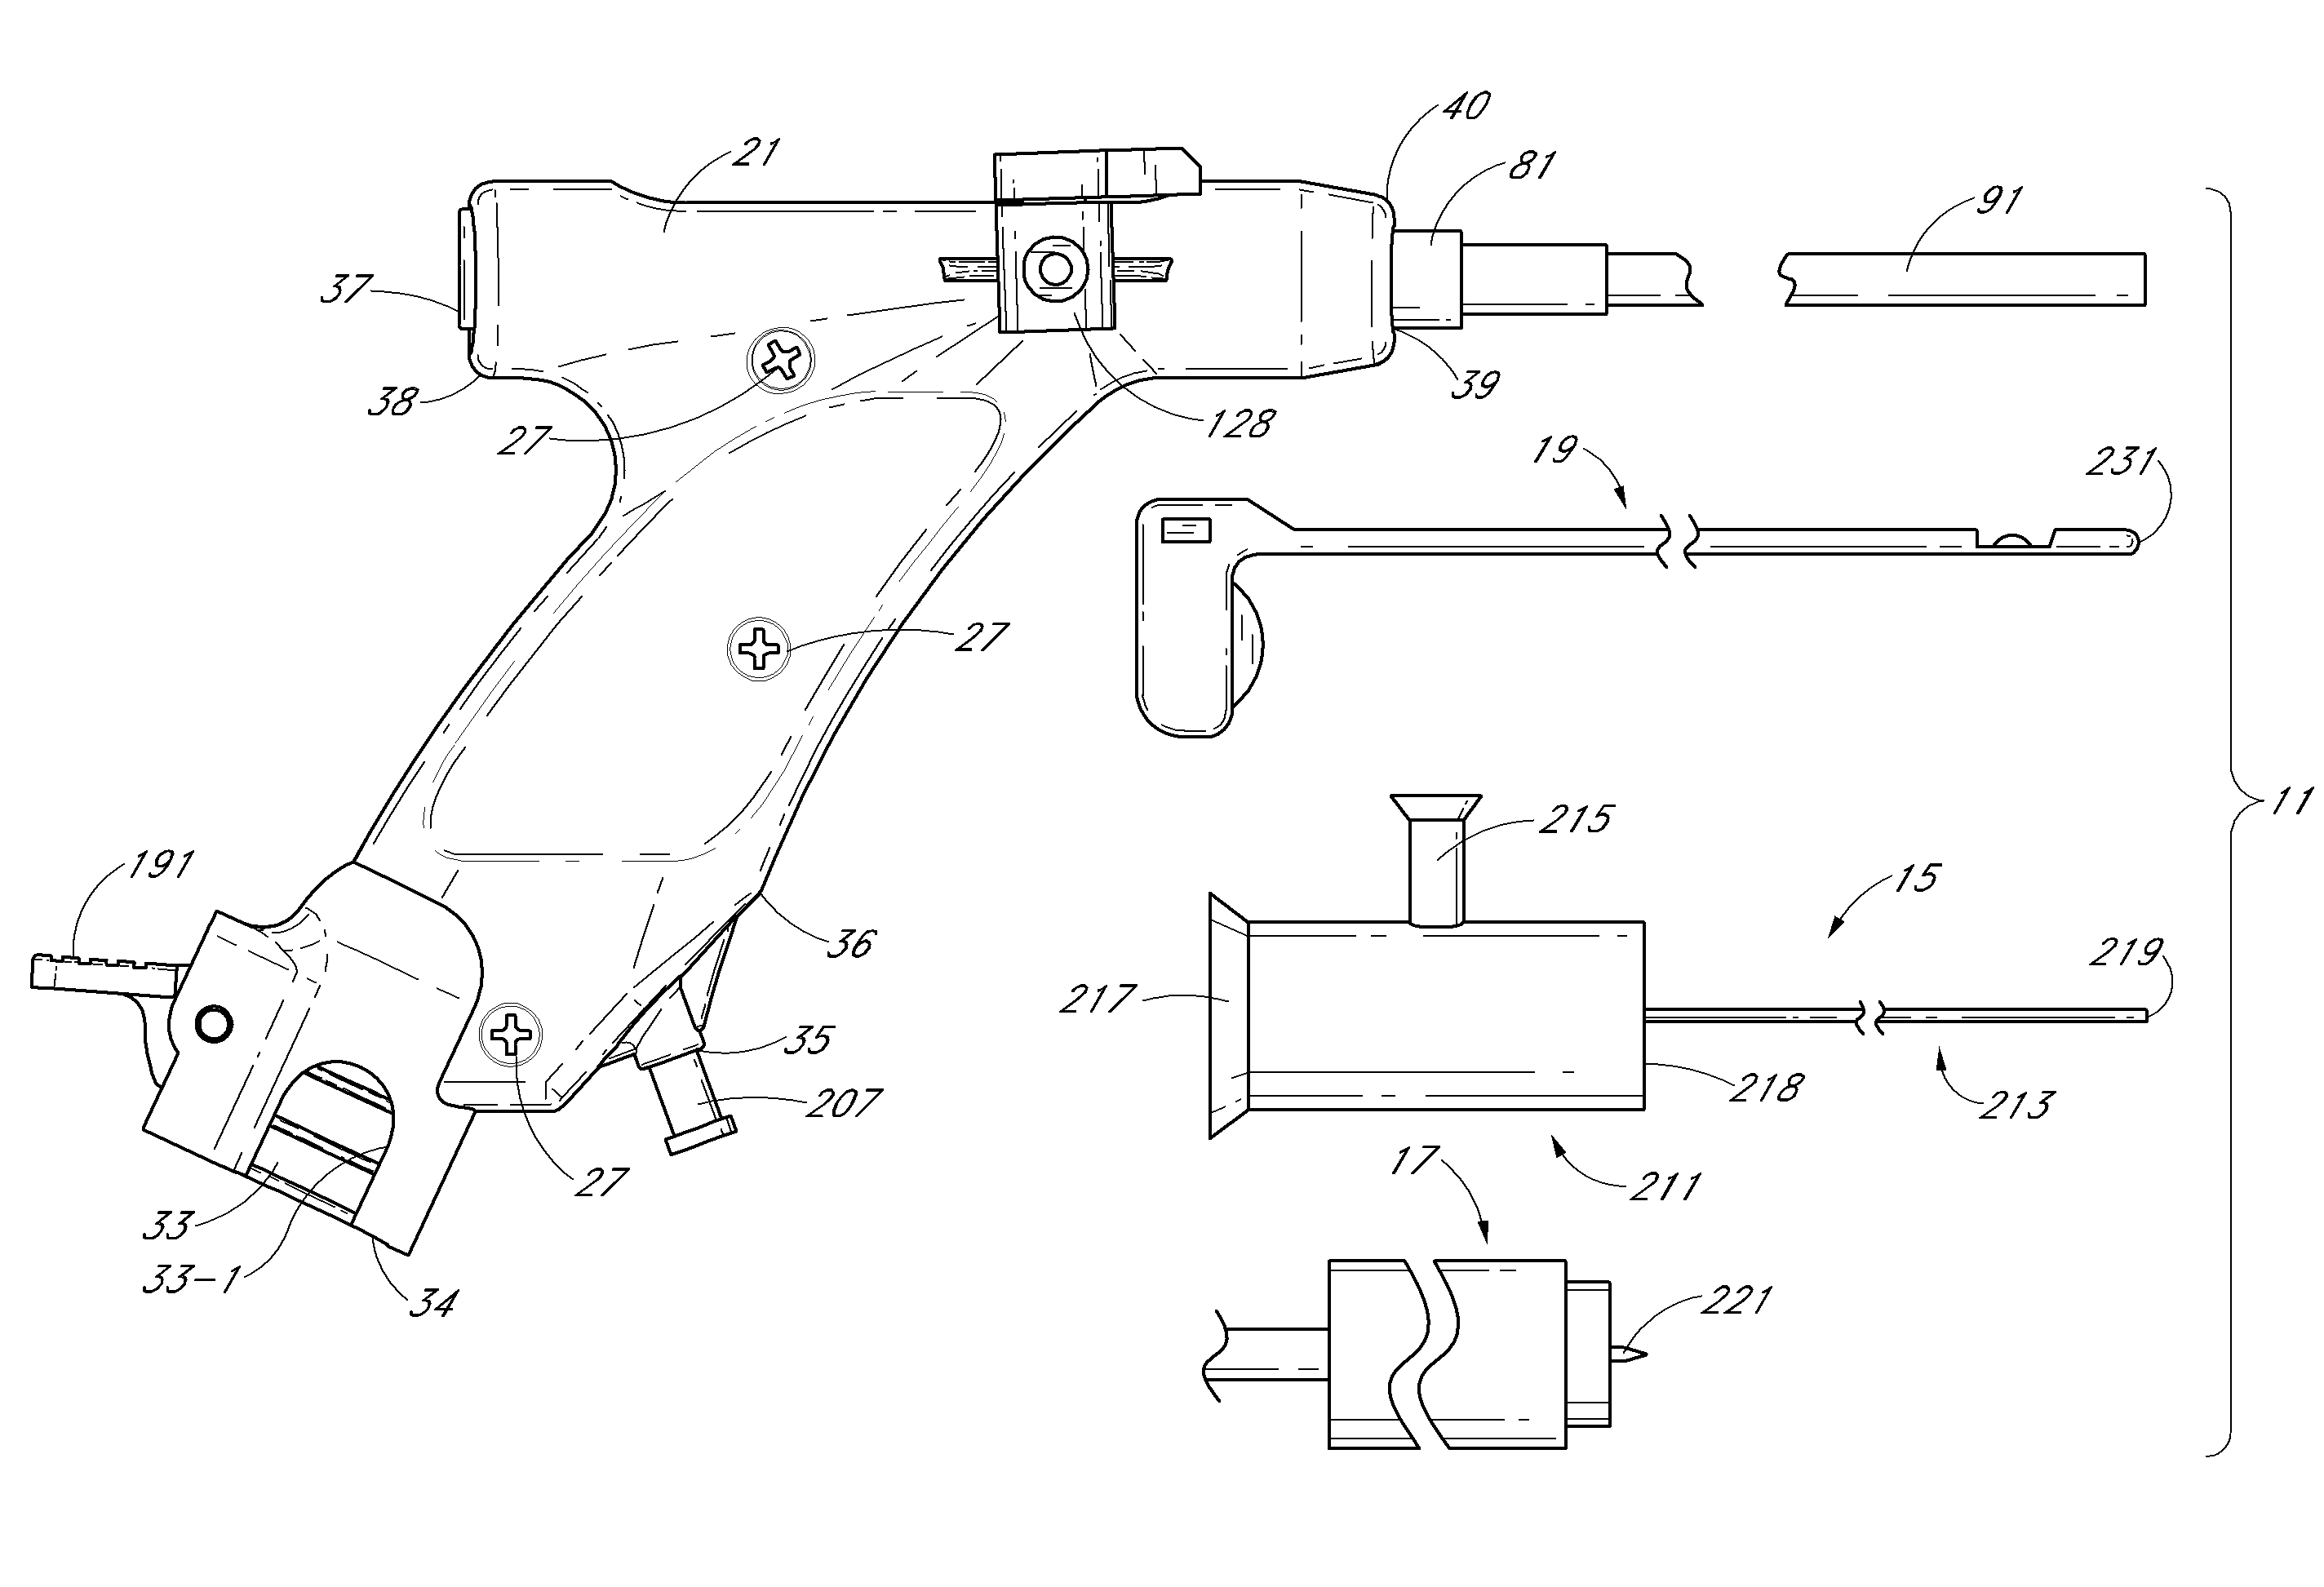 System for use in performing a medical procedure and introducer device suitable for use in said system